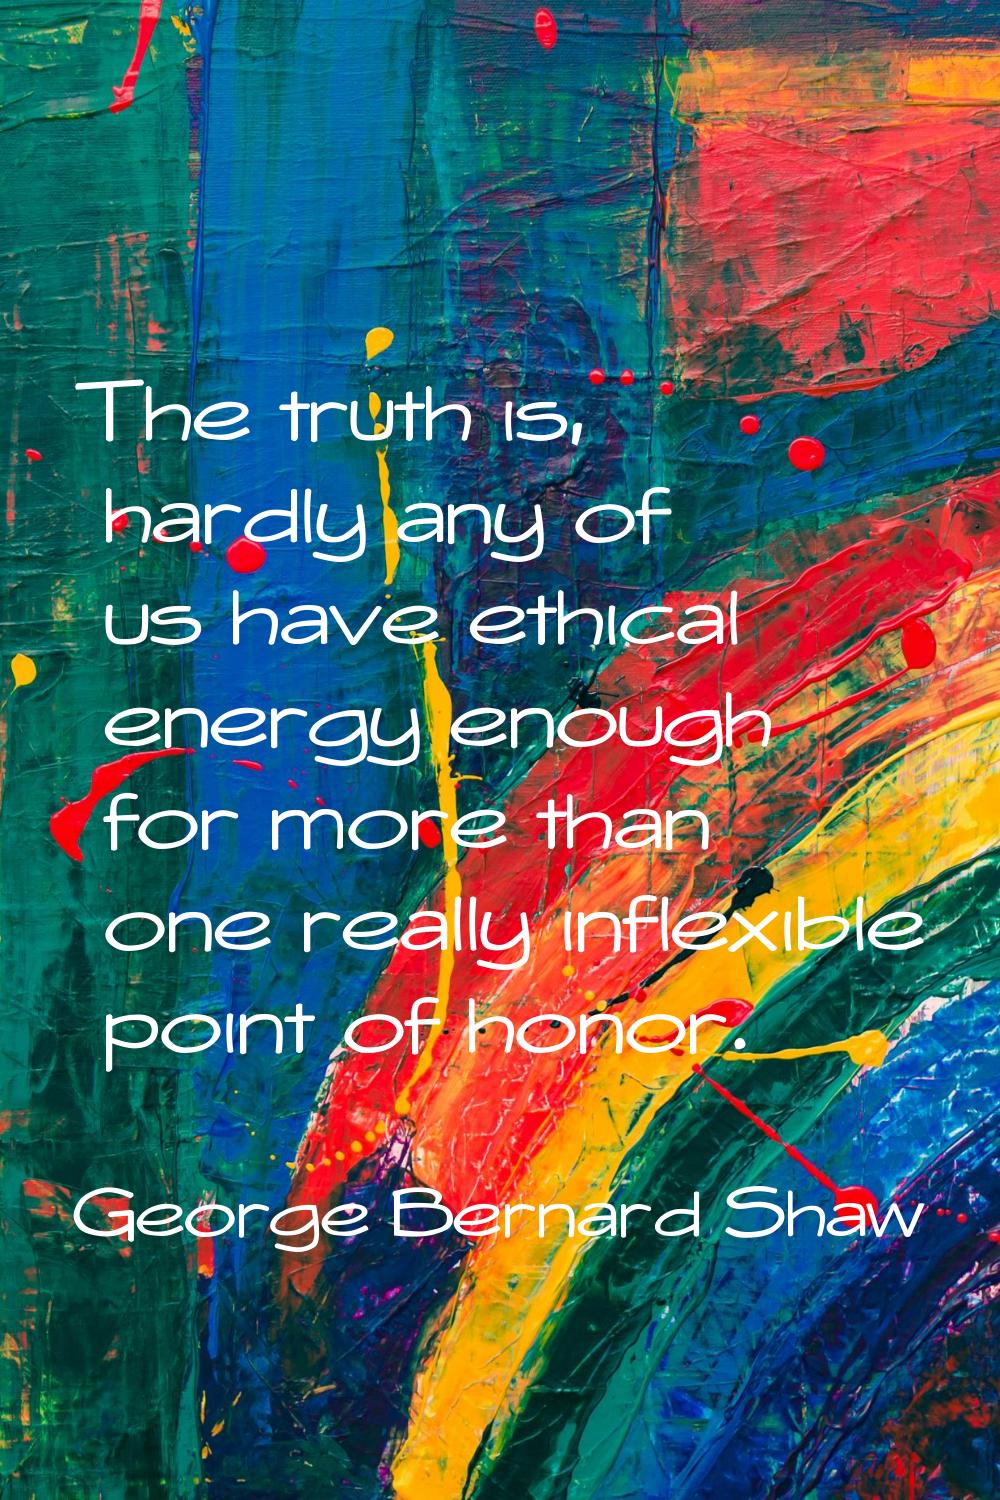 The truth is, hardly any of us have ethical energy enough for more than one really inflexible point